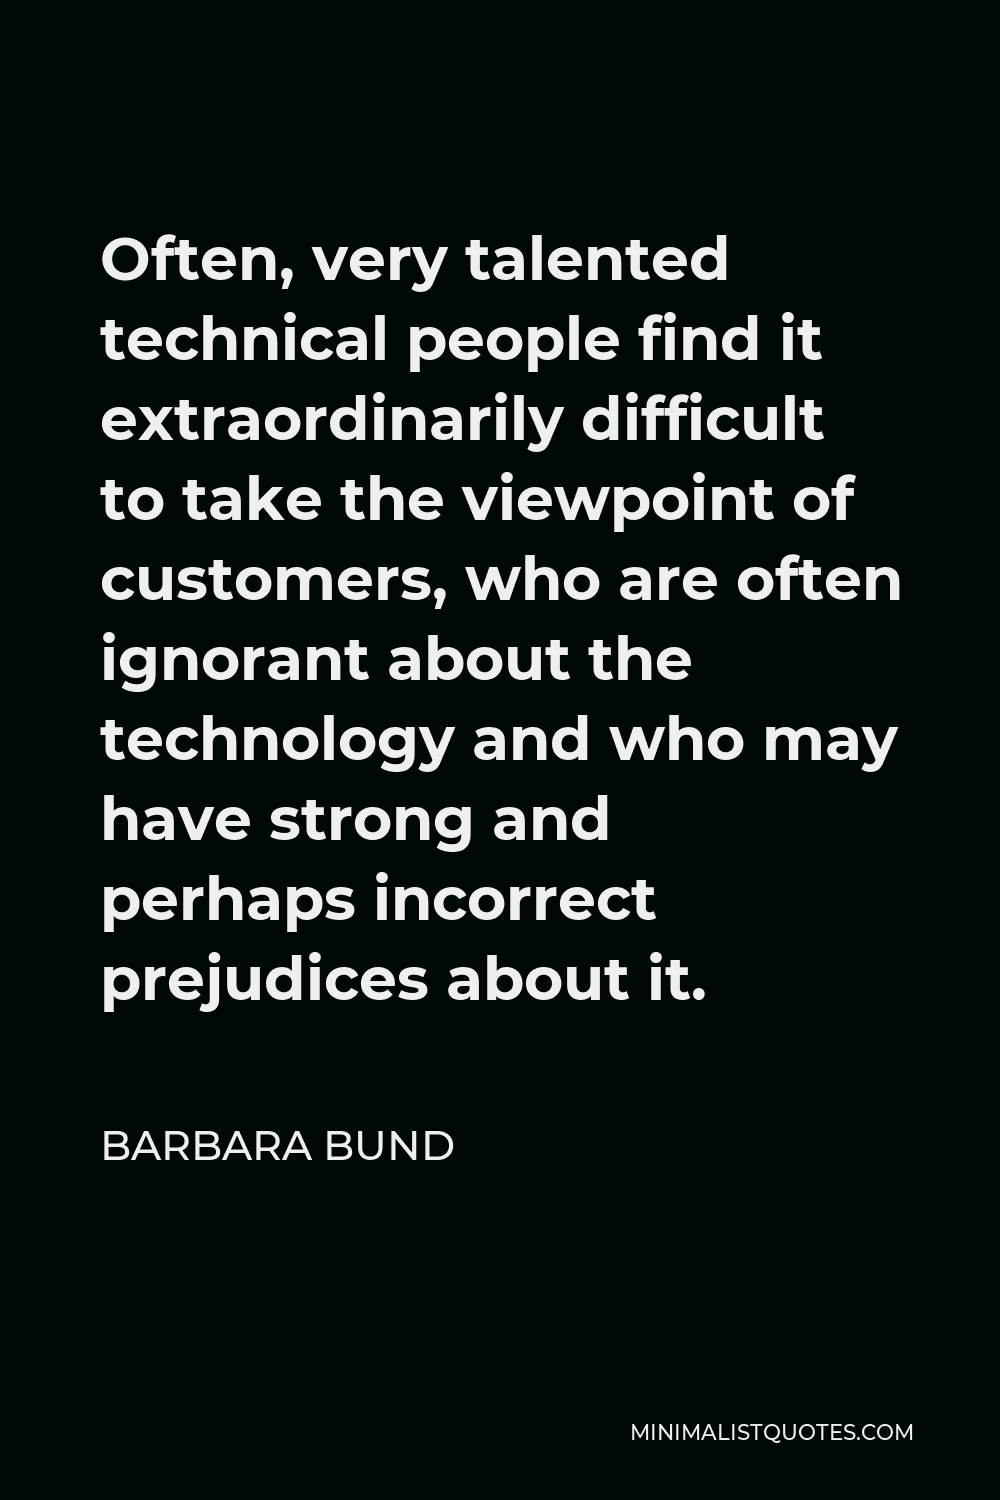 Barbara Bund Quote - Often, very talented technical people find it extraordinarily difficult to take the viewpoint of customers, who are often ignorant about the technology and who may have strong and perhaps incorrect prejudices about it.